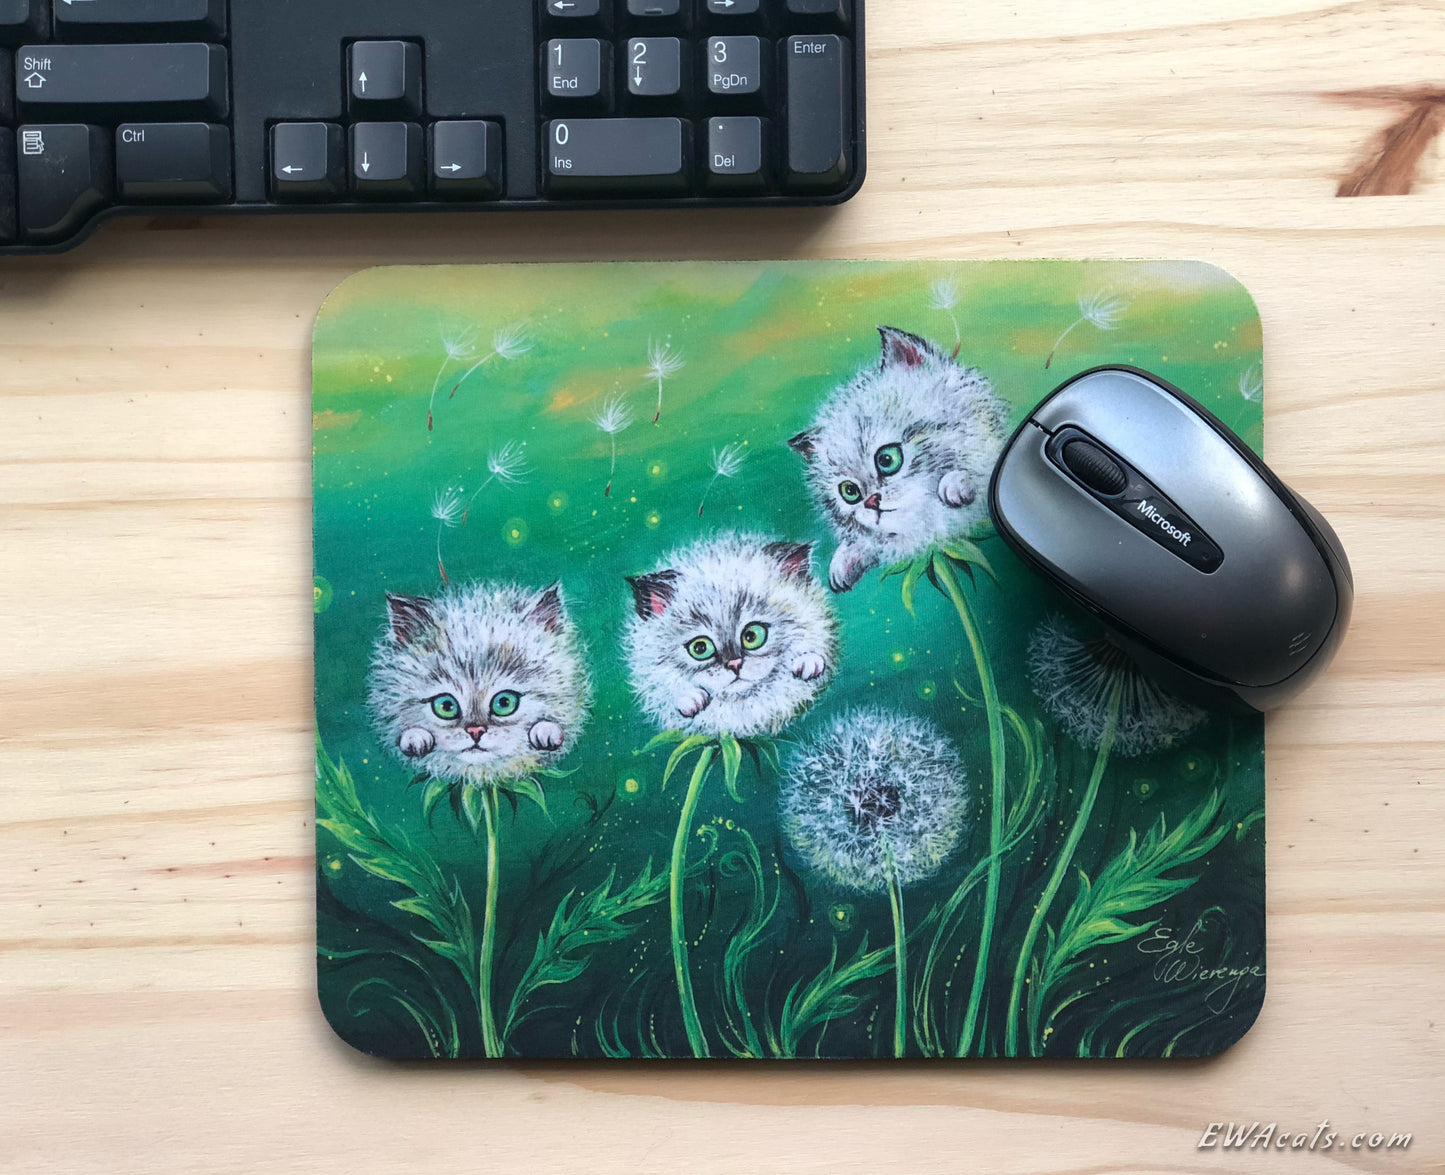 Mouse Pad "Kittylions"